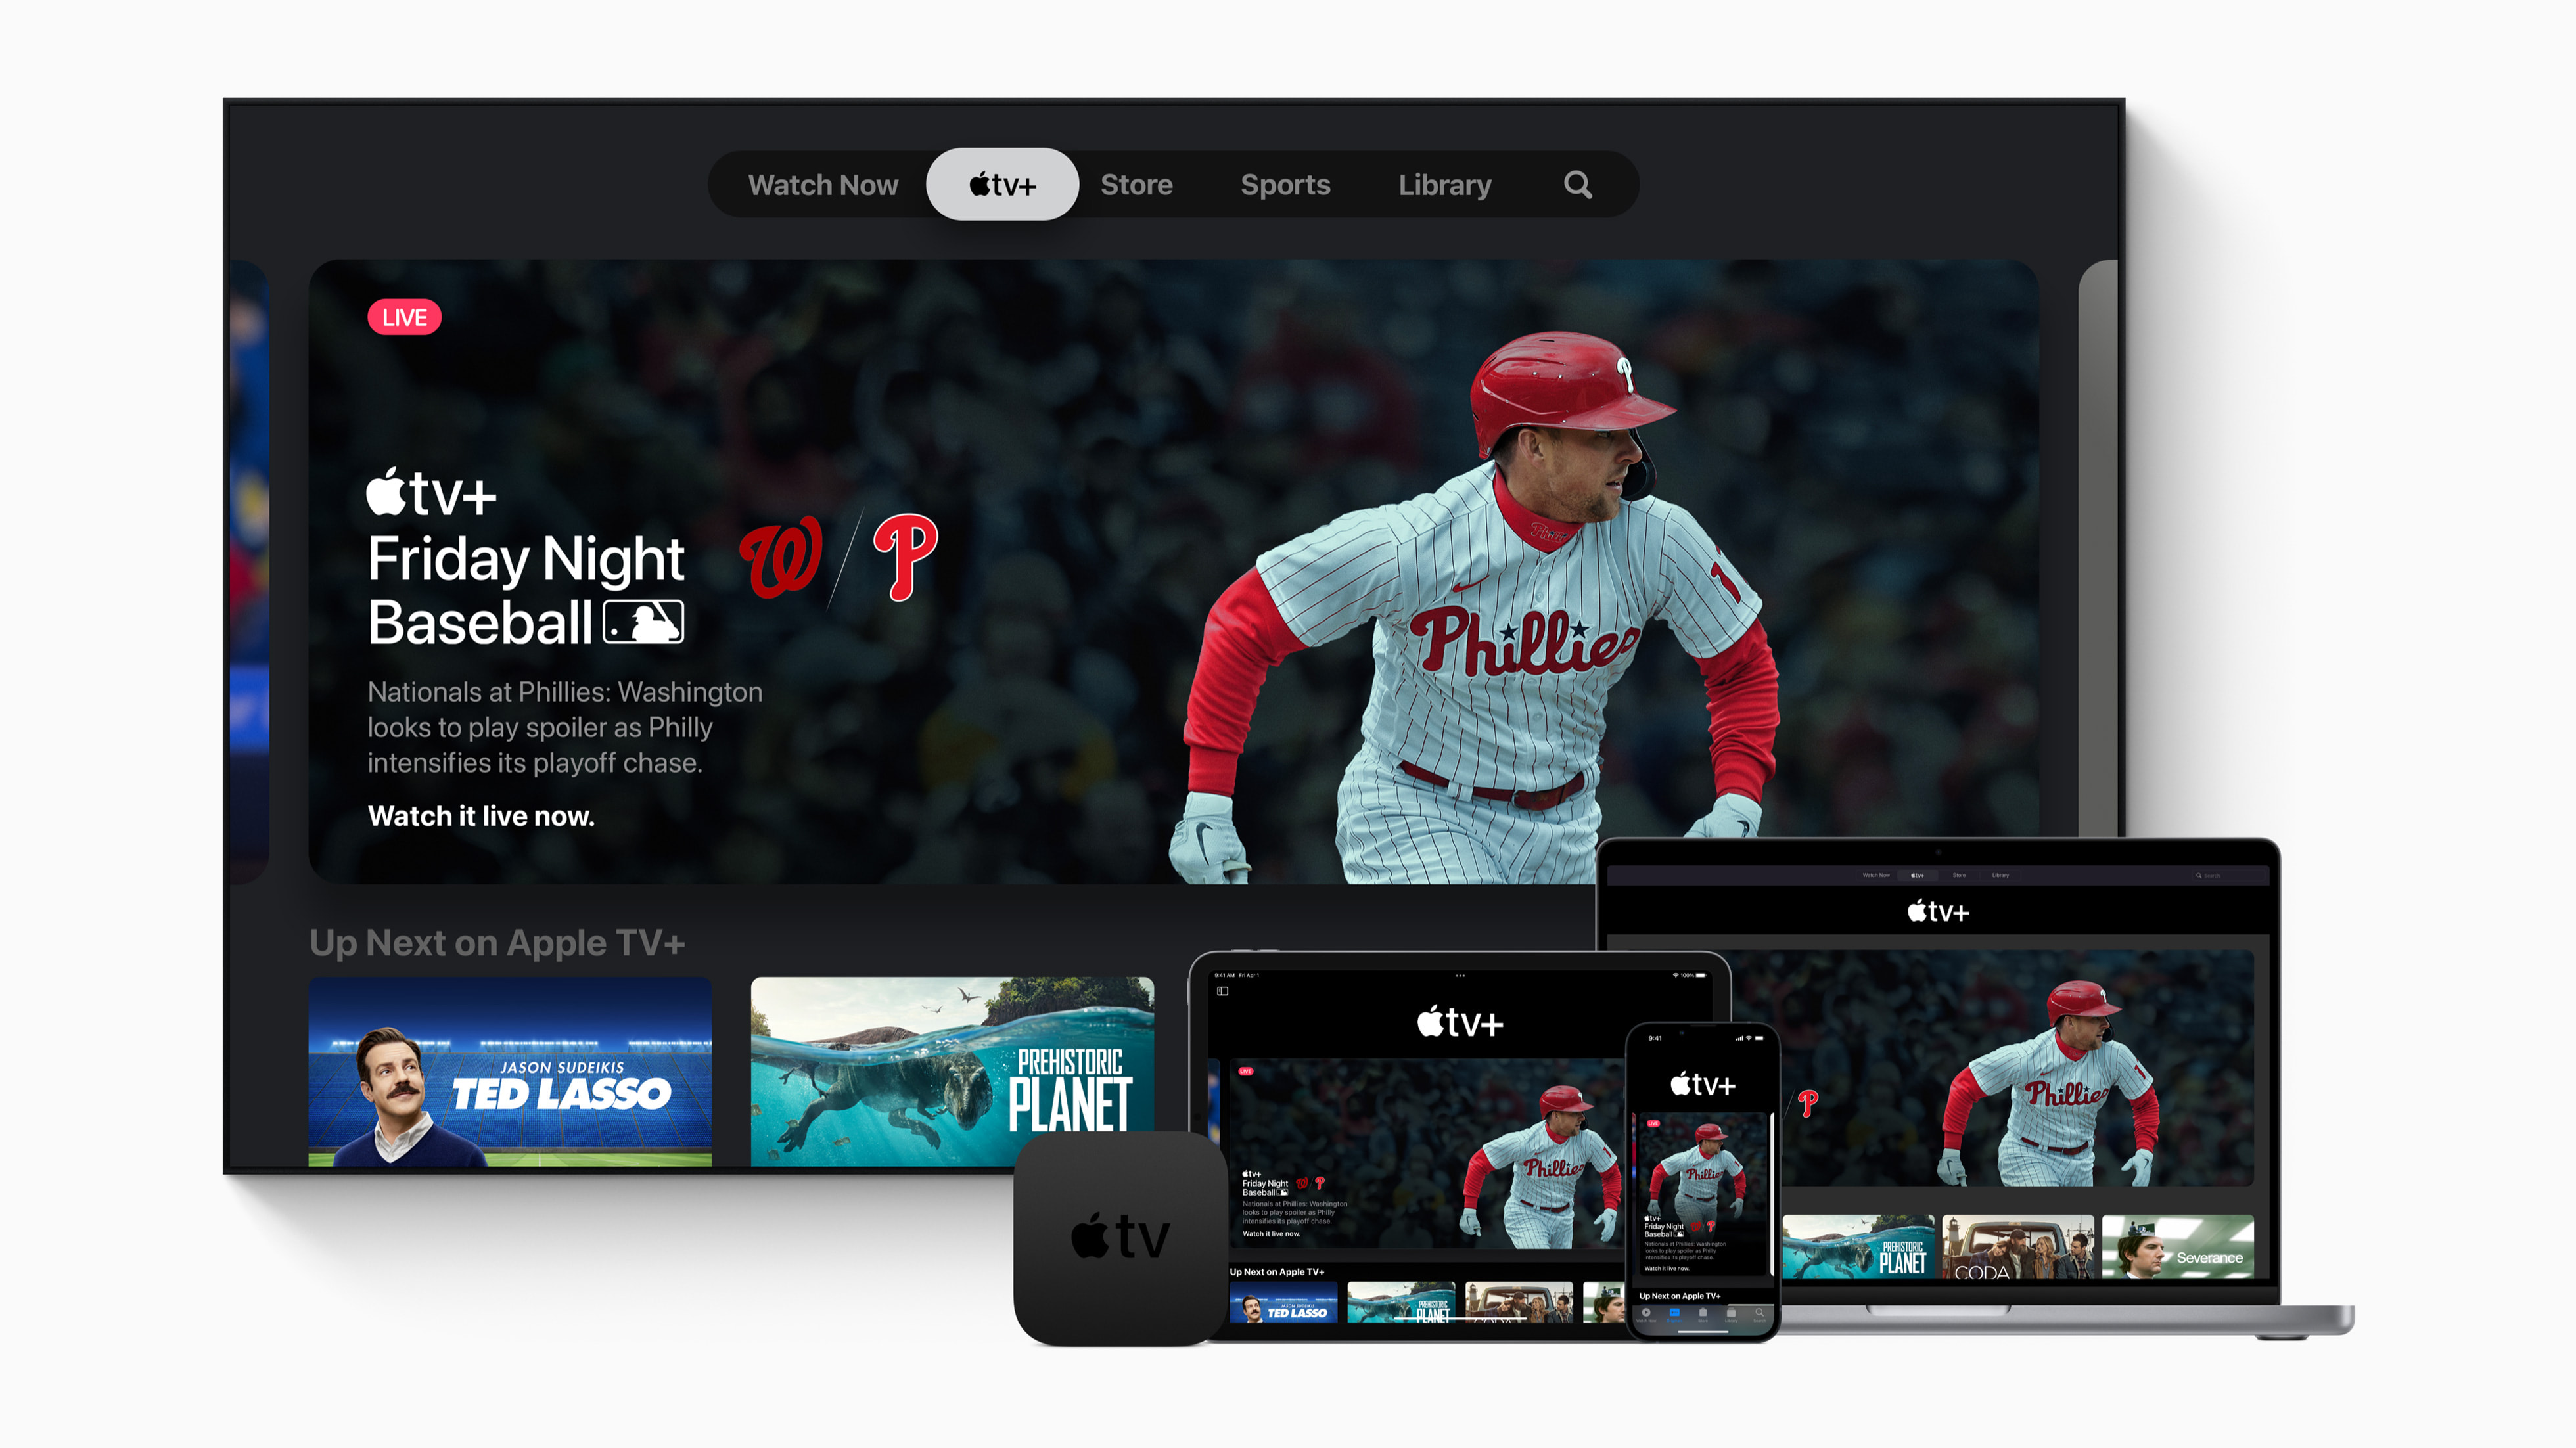 Apple and MLB announce September “Friday Night Baseball” schedule